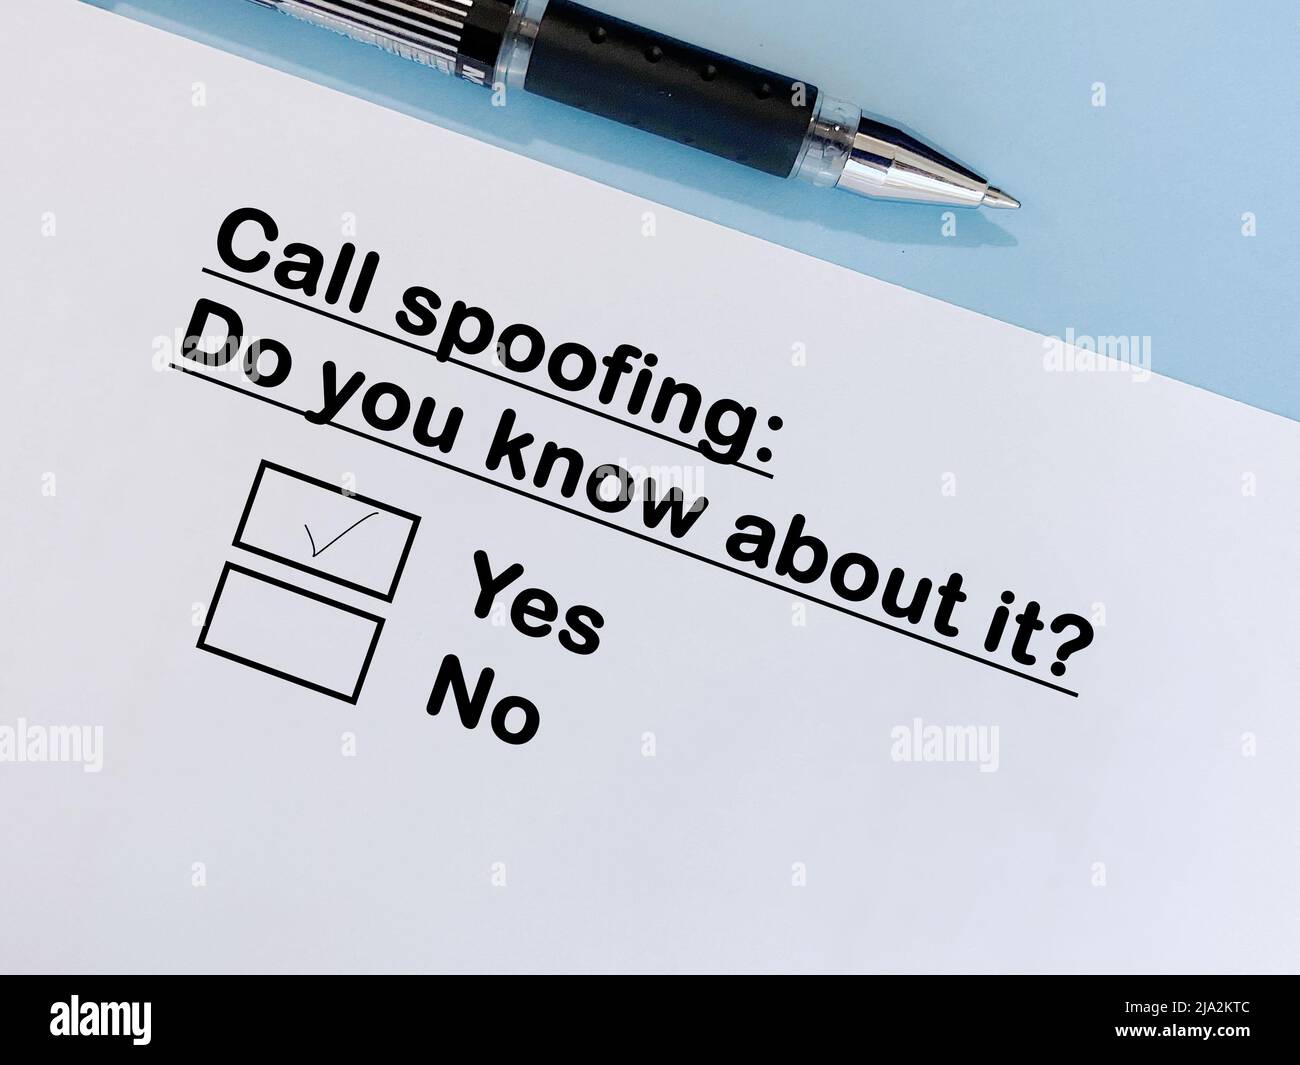 One person is answering question about scam and fraud. He knows about call spoofing. Stock Photo